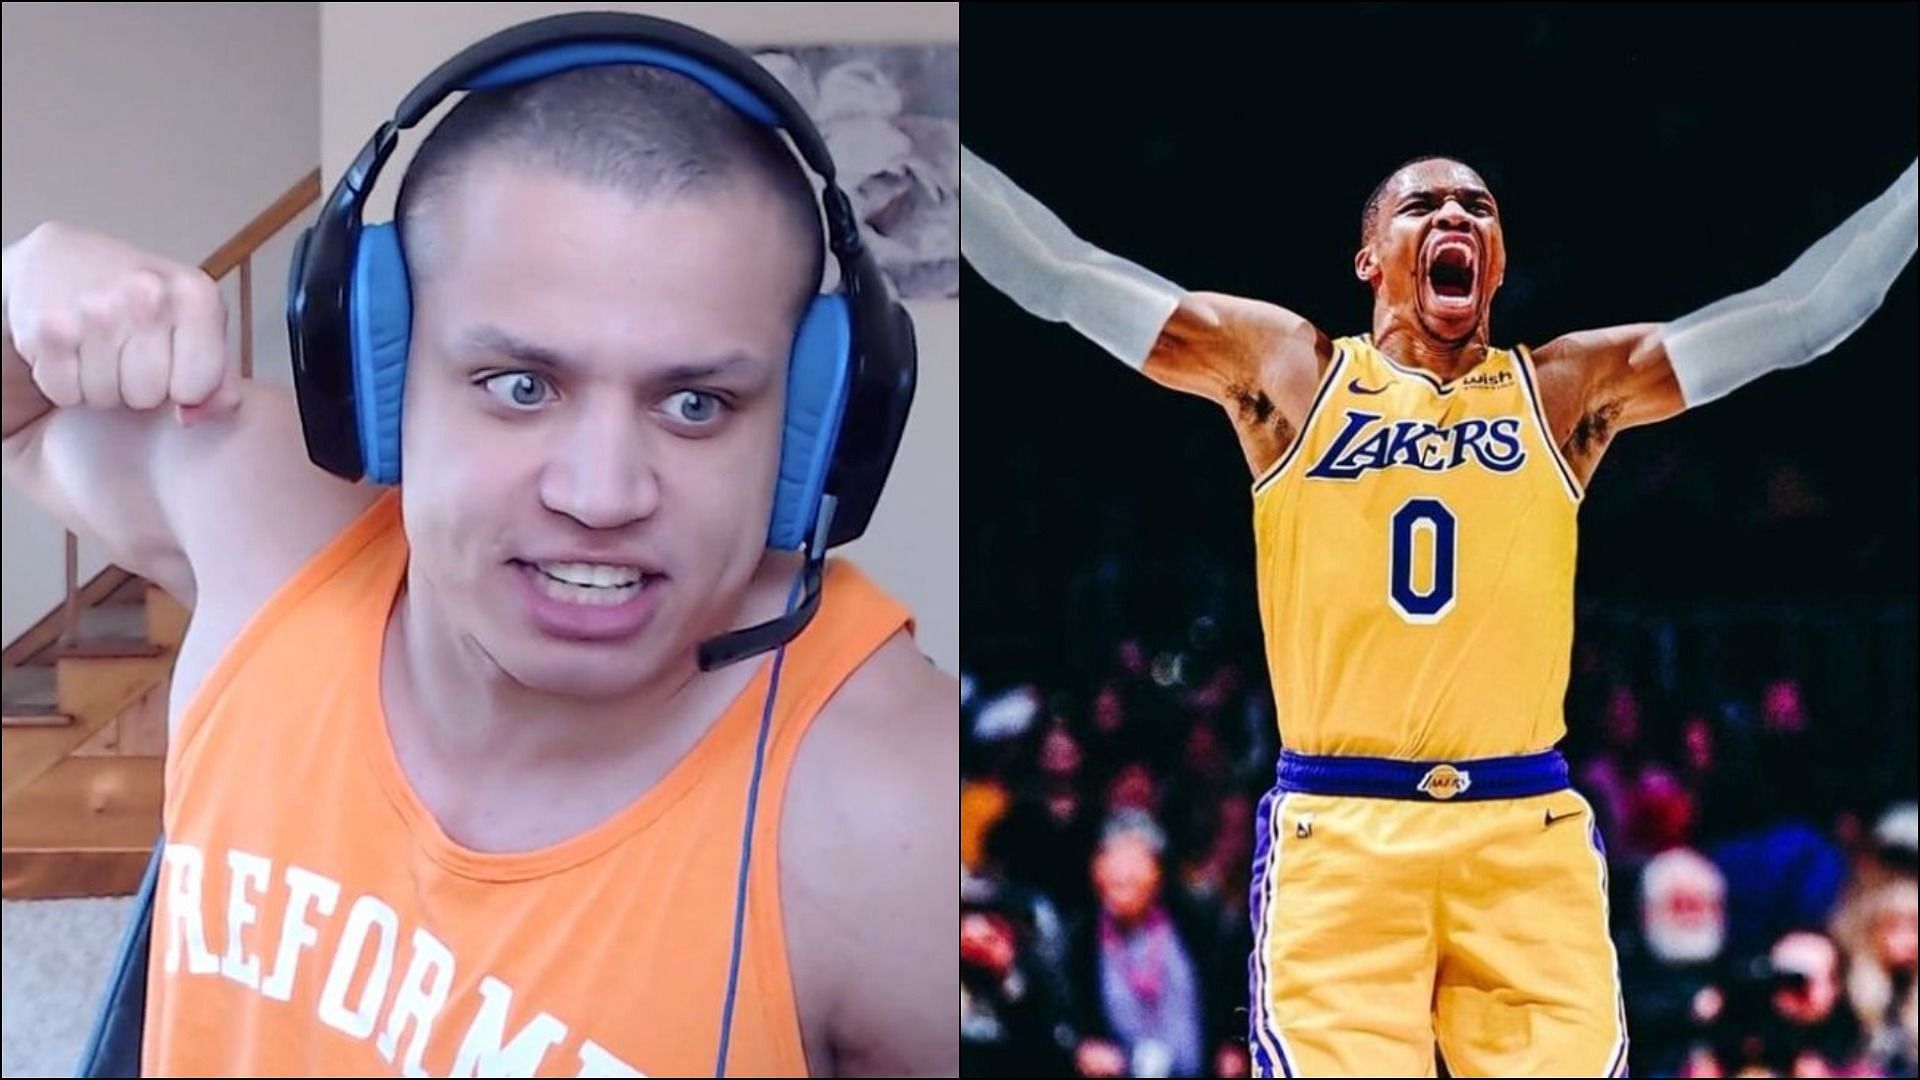 Tyler1 criticizes Lakers player Russell Westbrook for poor performance (Image via Sportskeeda)